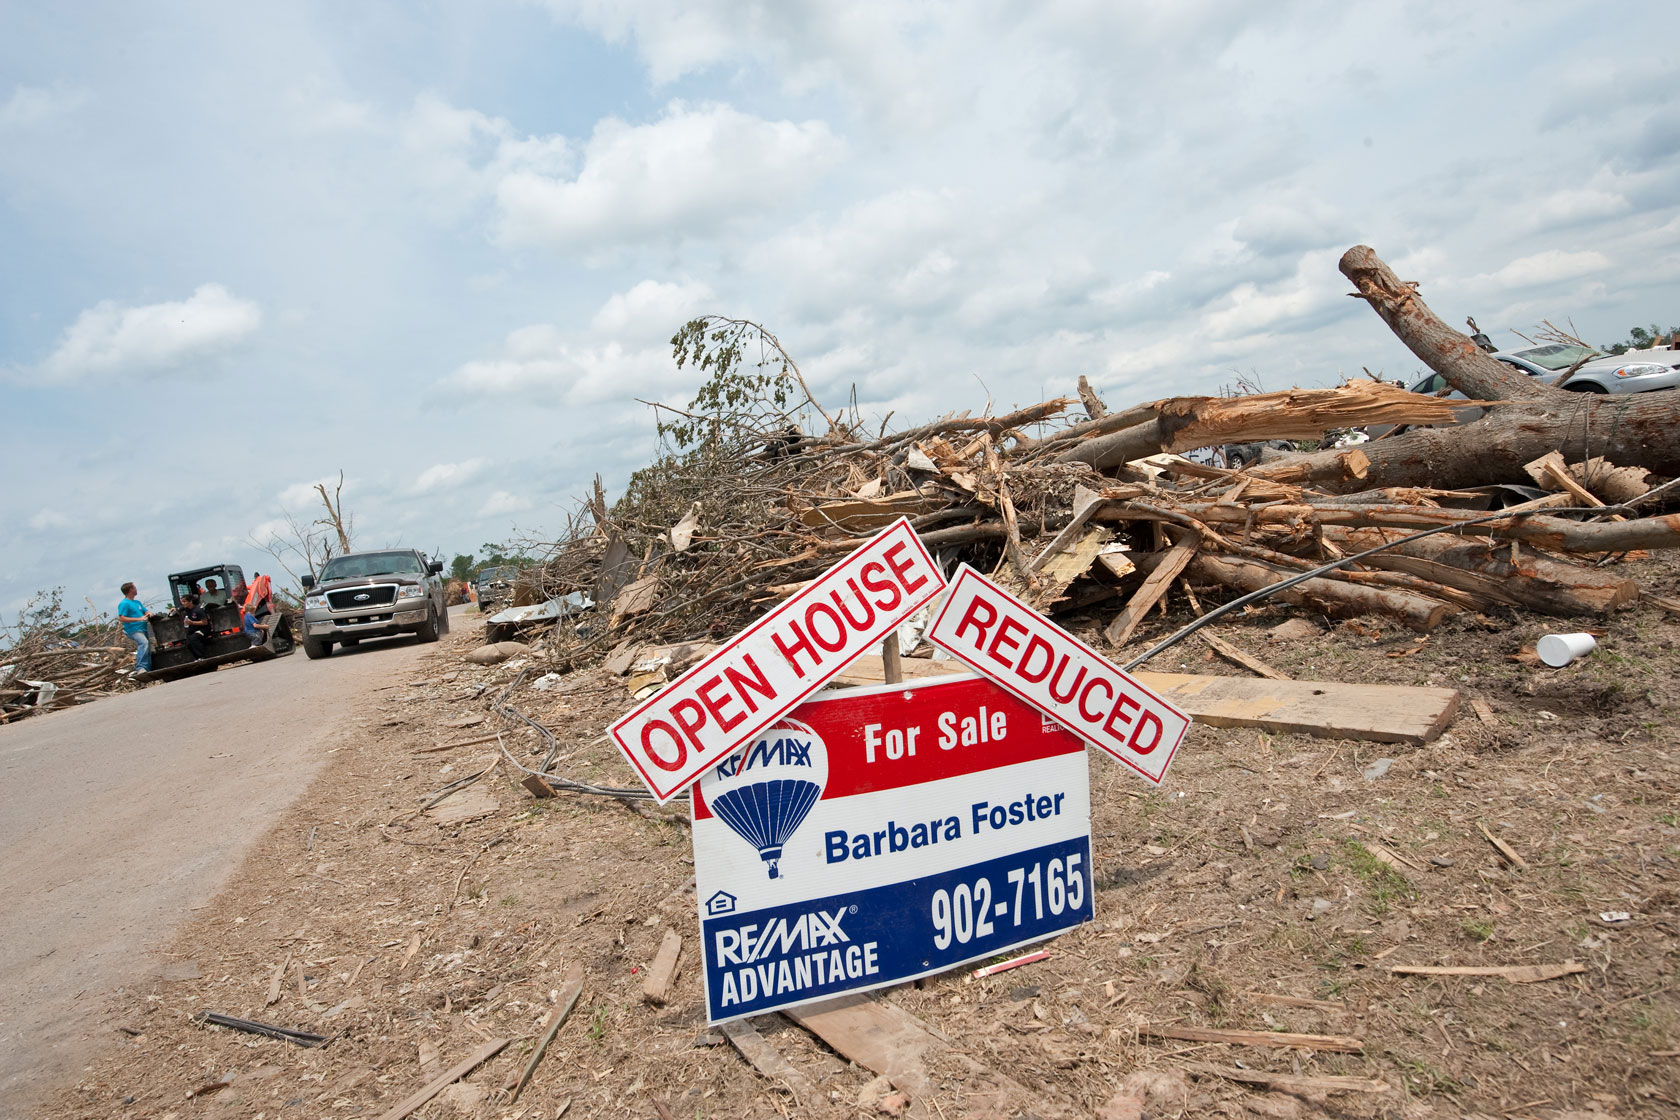 A for-sale sign is up in front of the remains of a house, which was destroyed due to a tornado in Concord, Alabama, on May 1, 2011.